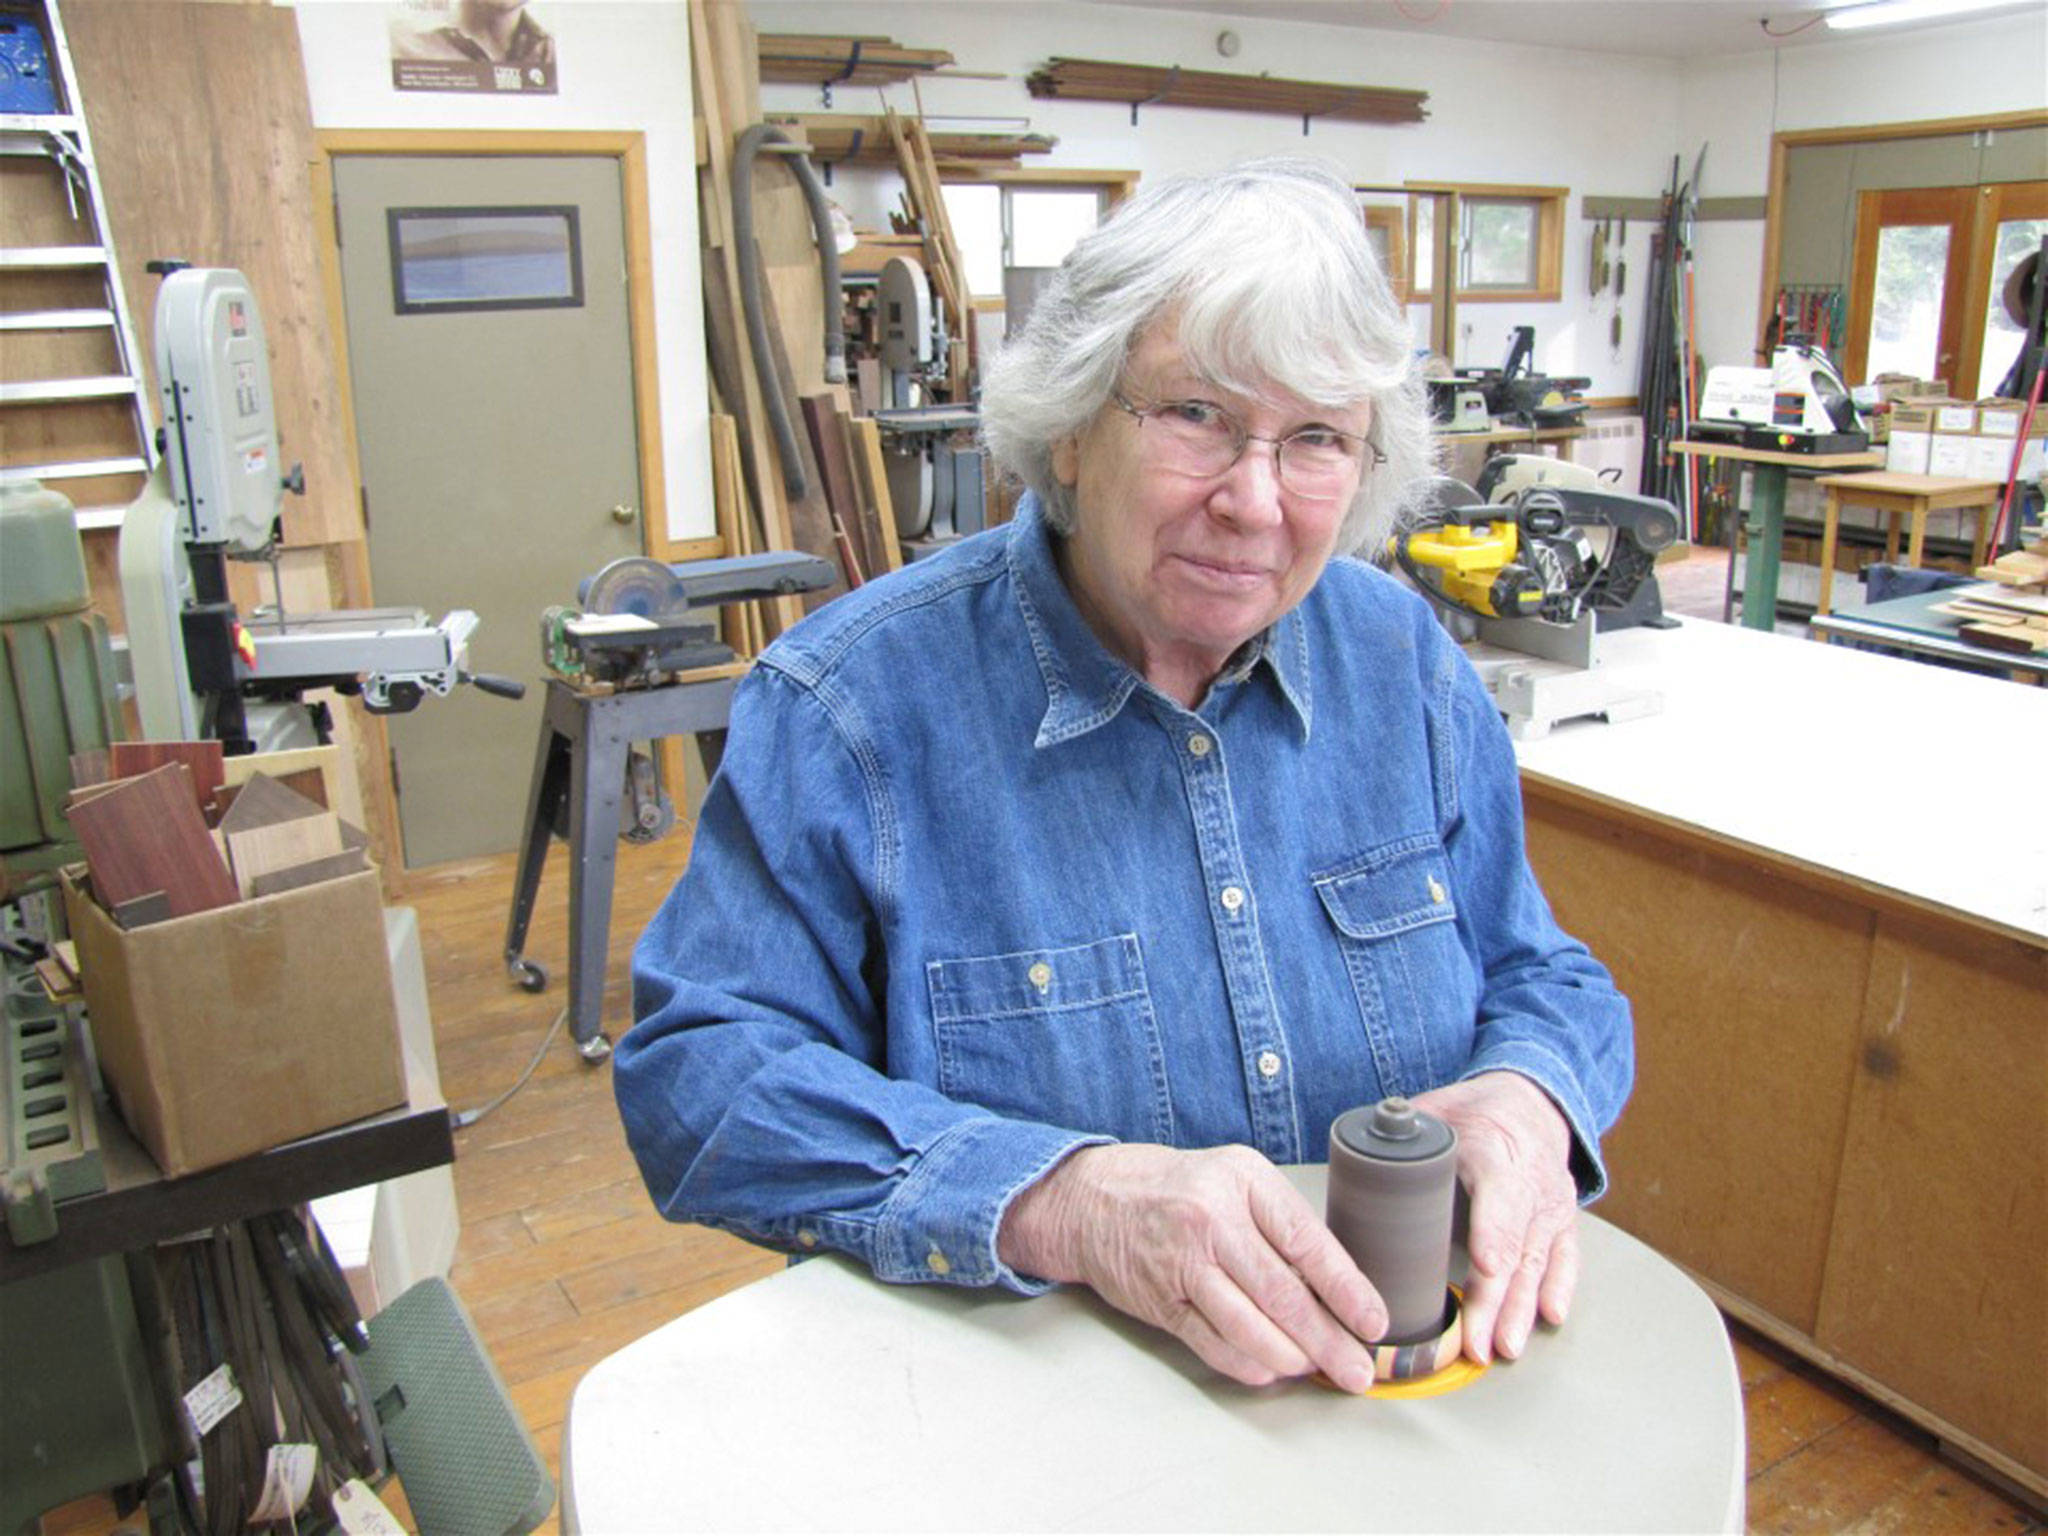 Sequim artist Martha Collins has been perfecting her woodworking skills for 40-plus years. She’ll speak about her career and technique at 9:30 a.m. Tuesday, Jan. 30, in Gardiner Community Center. Photo courtesy of Martha Collins